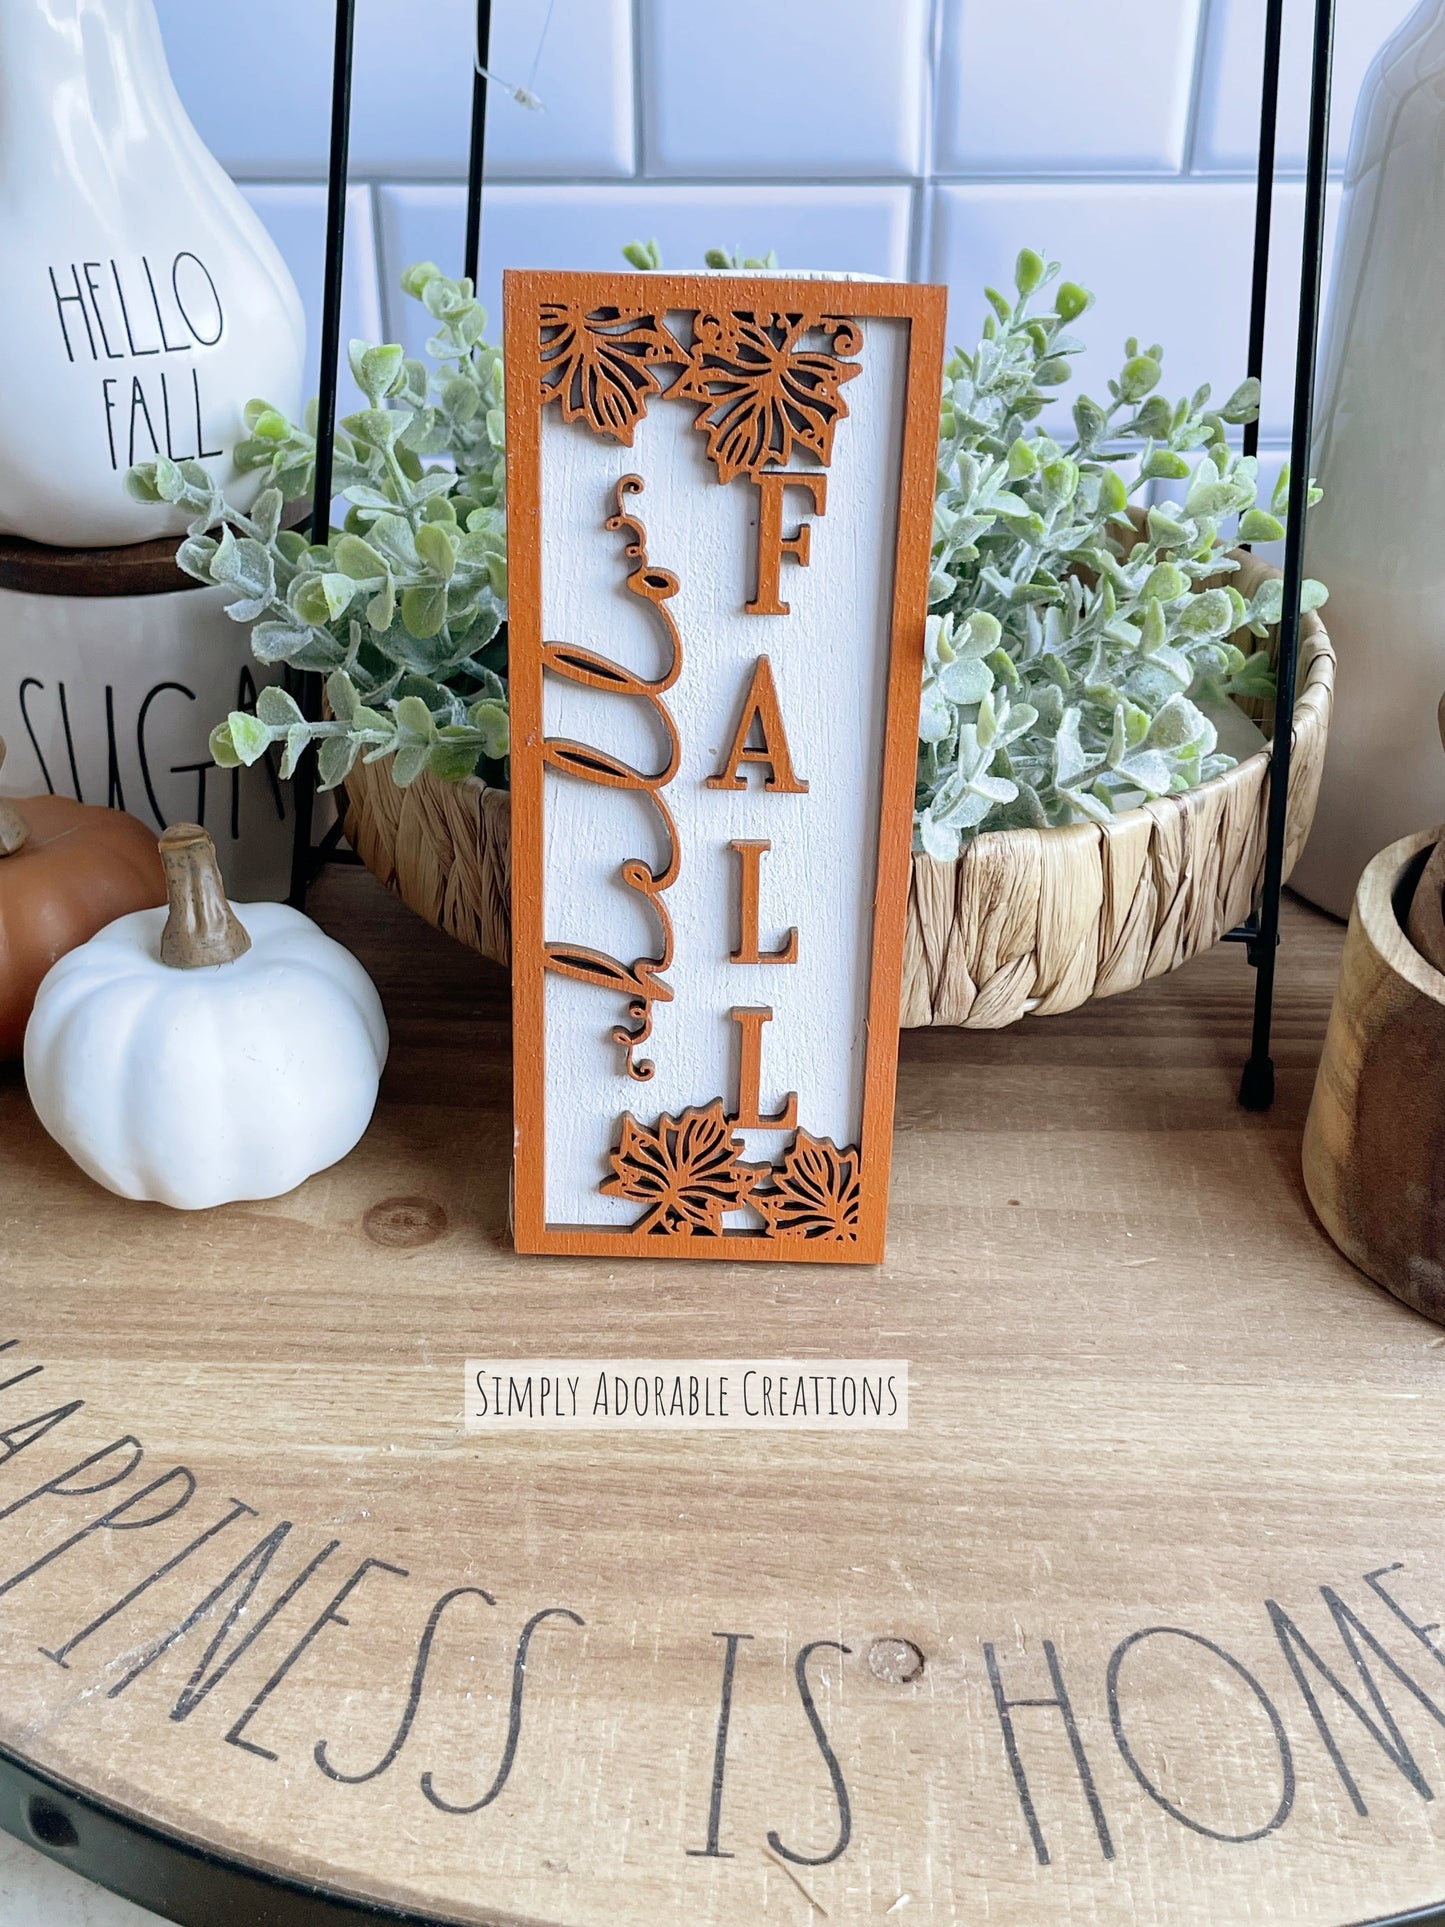 Hello Fall Tiered Tray Sign